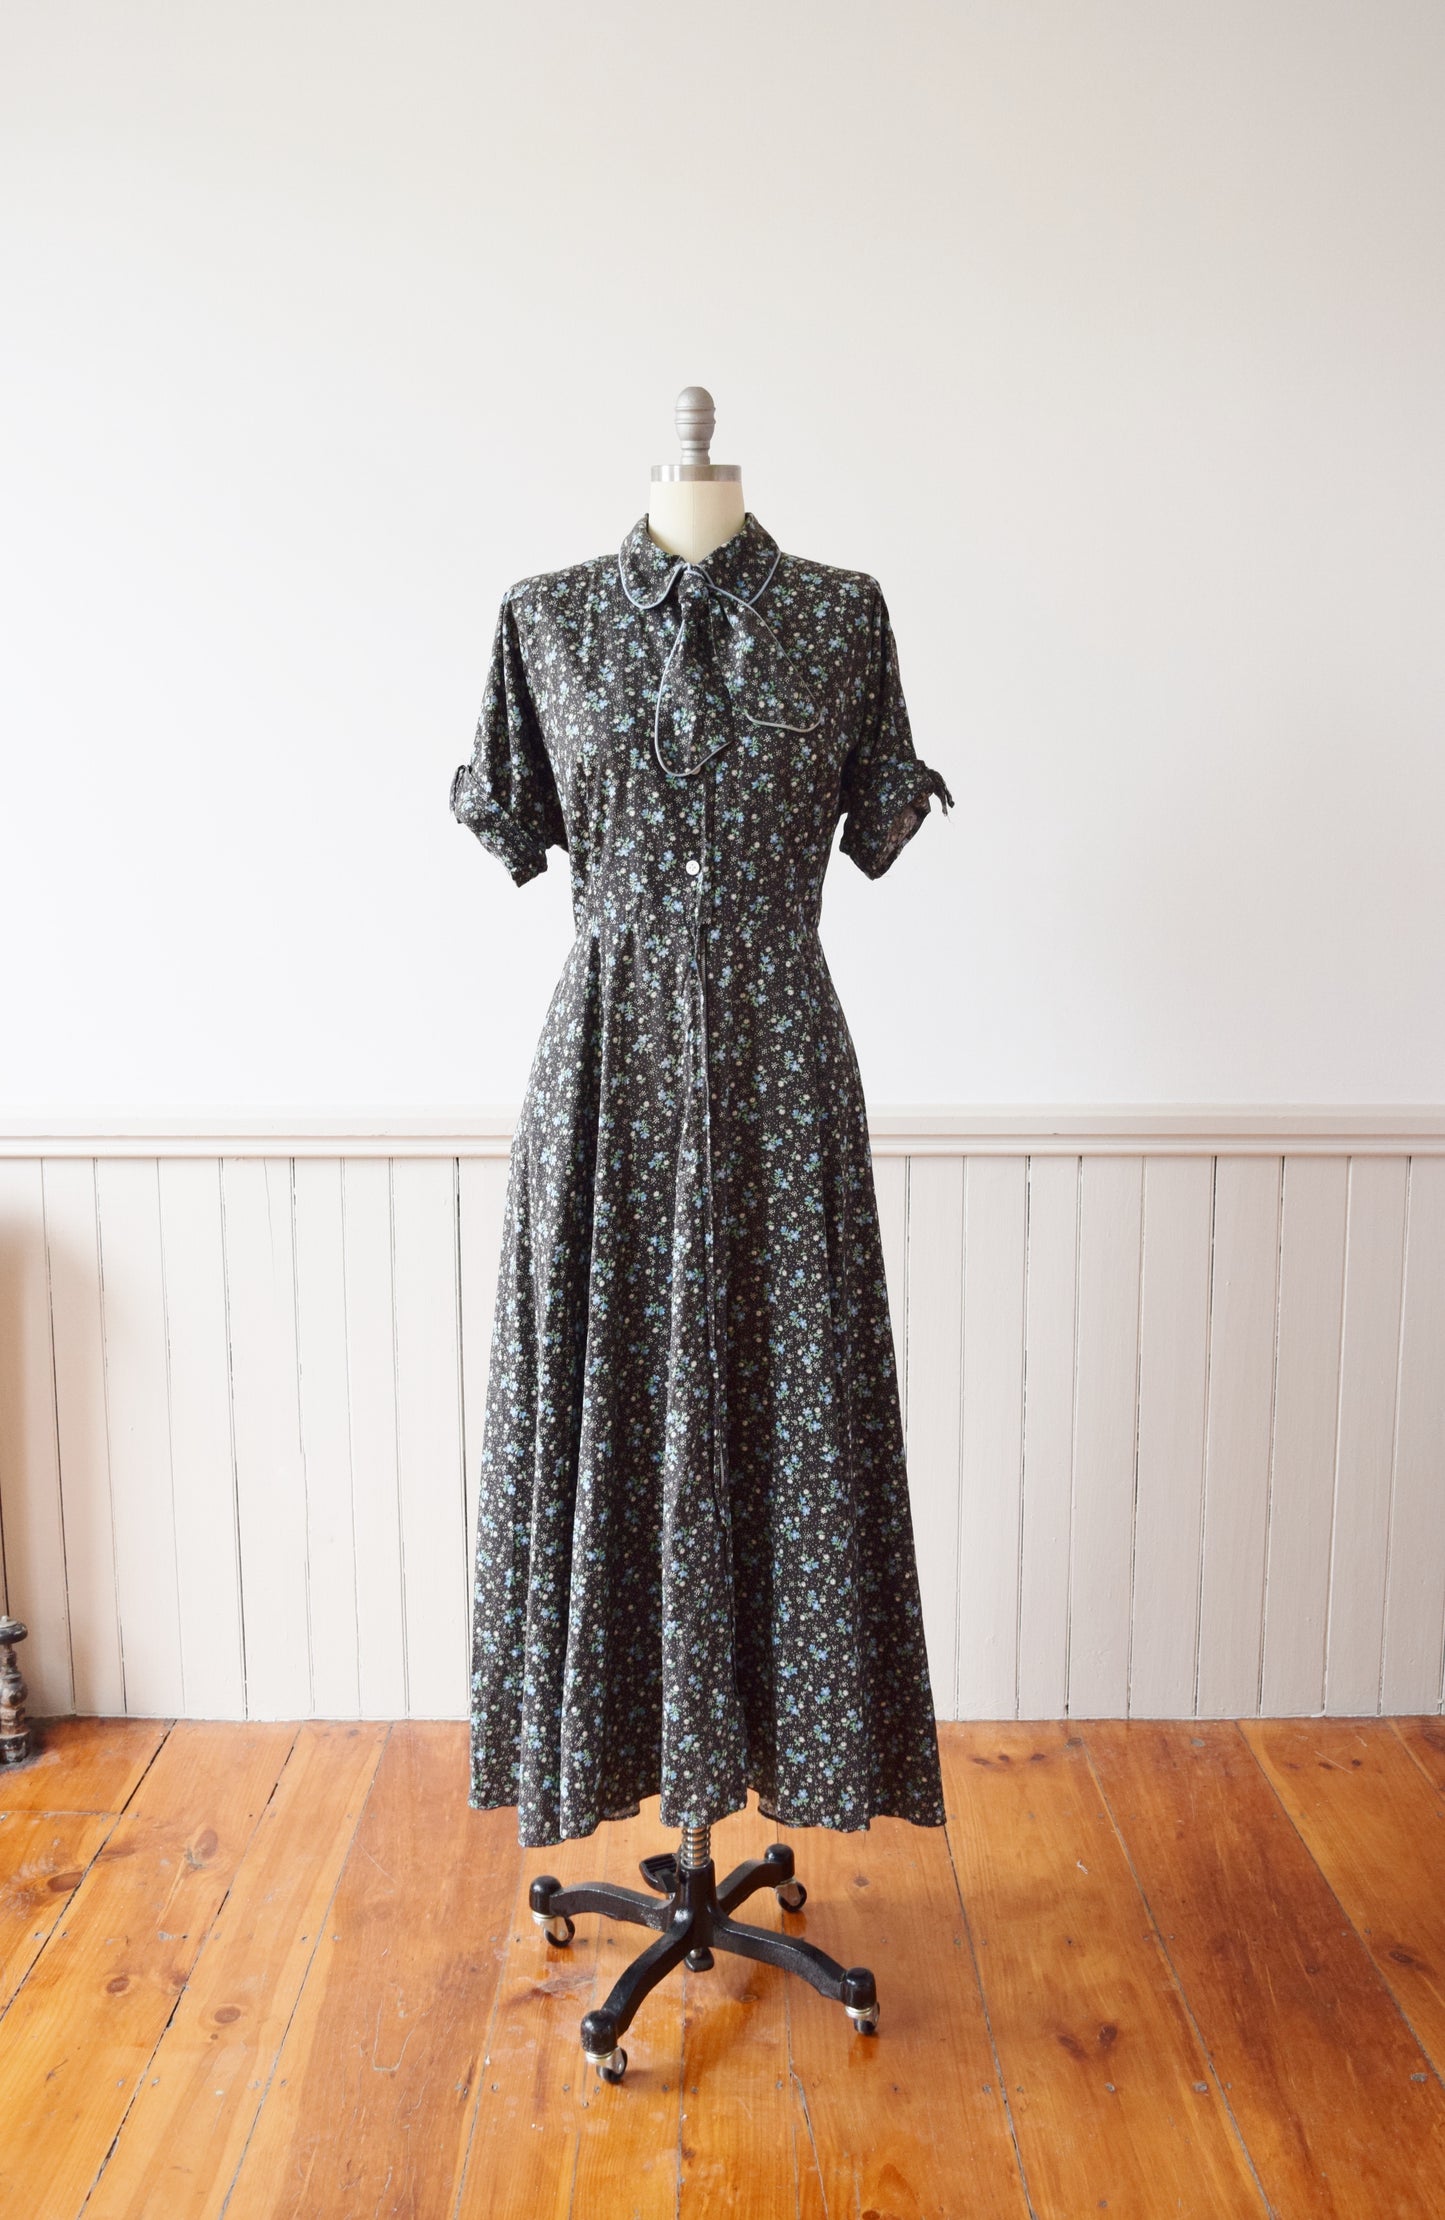 Early 1950s Zip Front Cotton Dress by Kamore | M